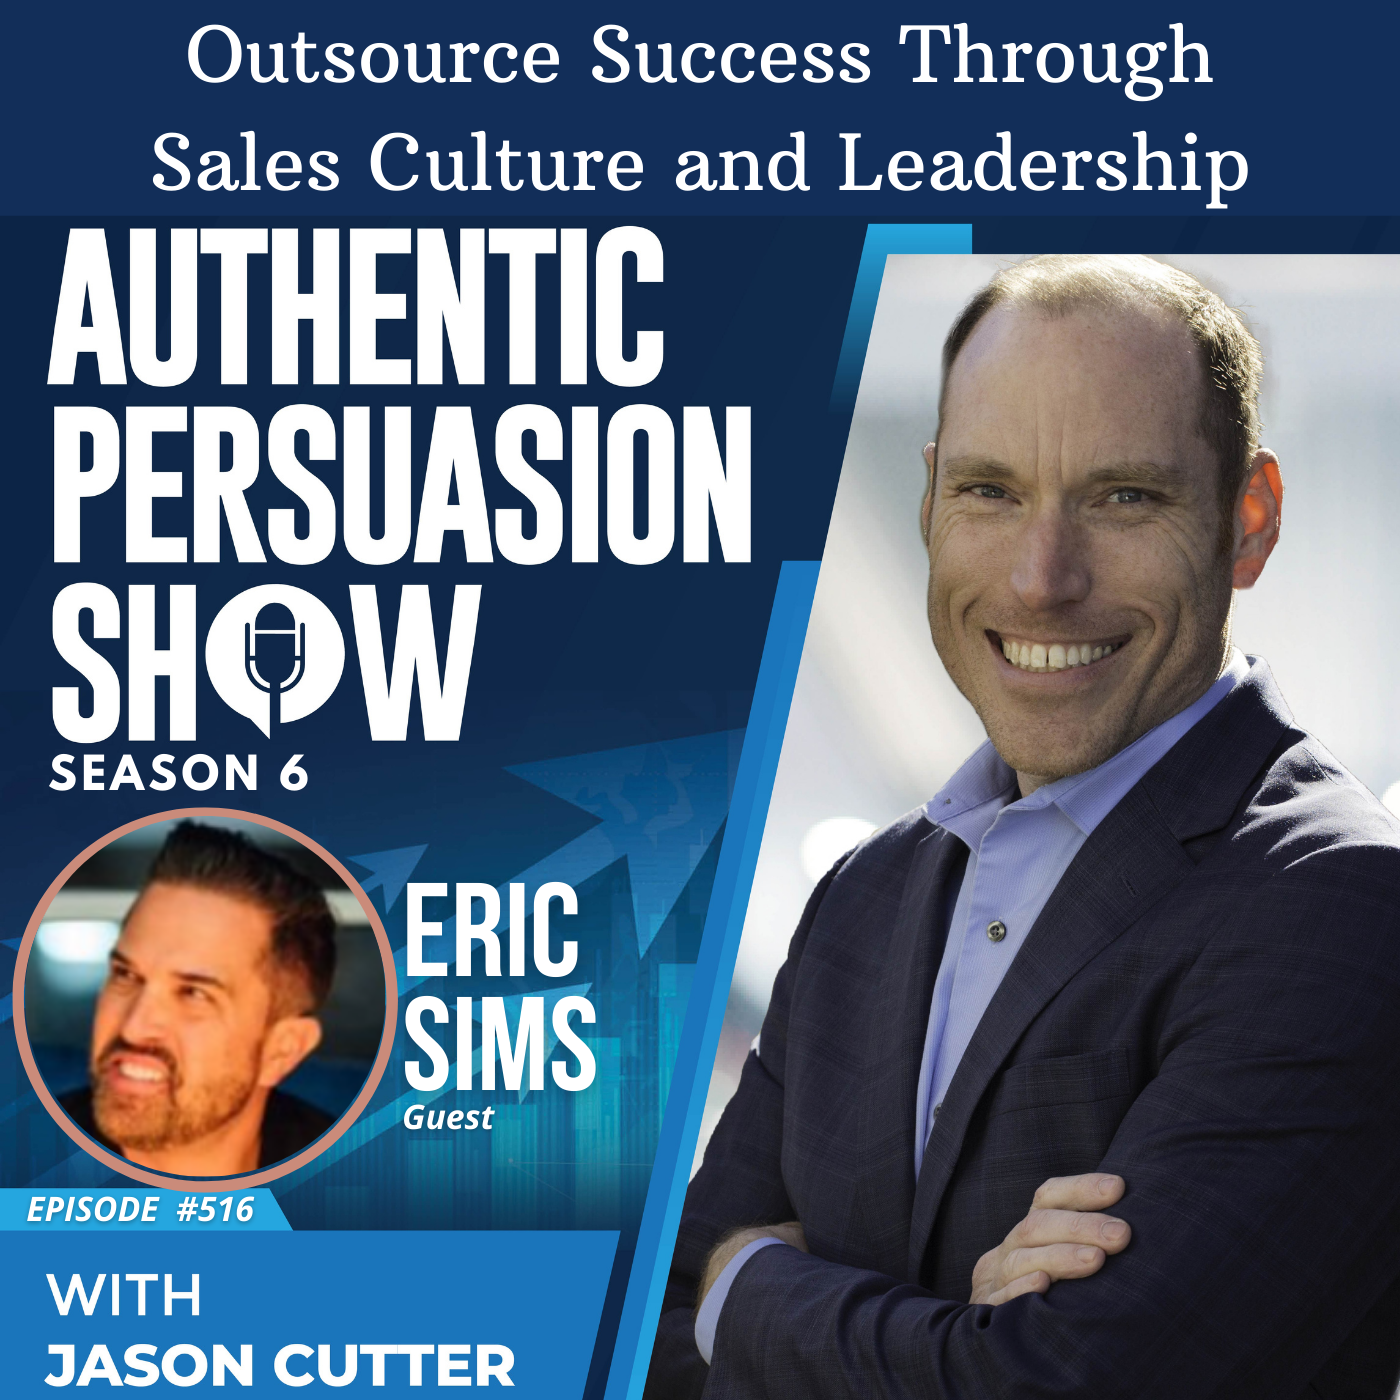 [516] Outsource Success Through Sales Culture and Leadership, with Eric Sims from Leading Edge Connections